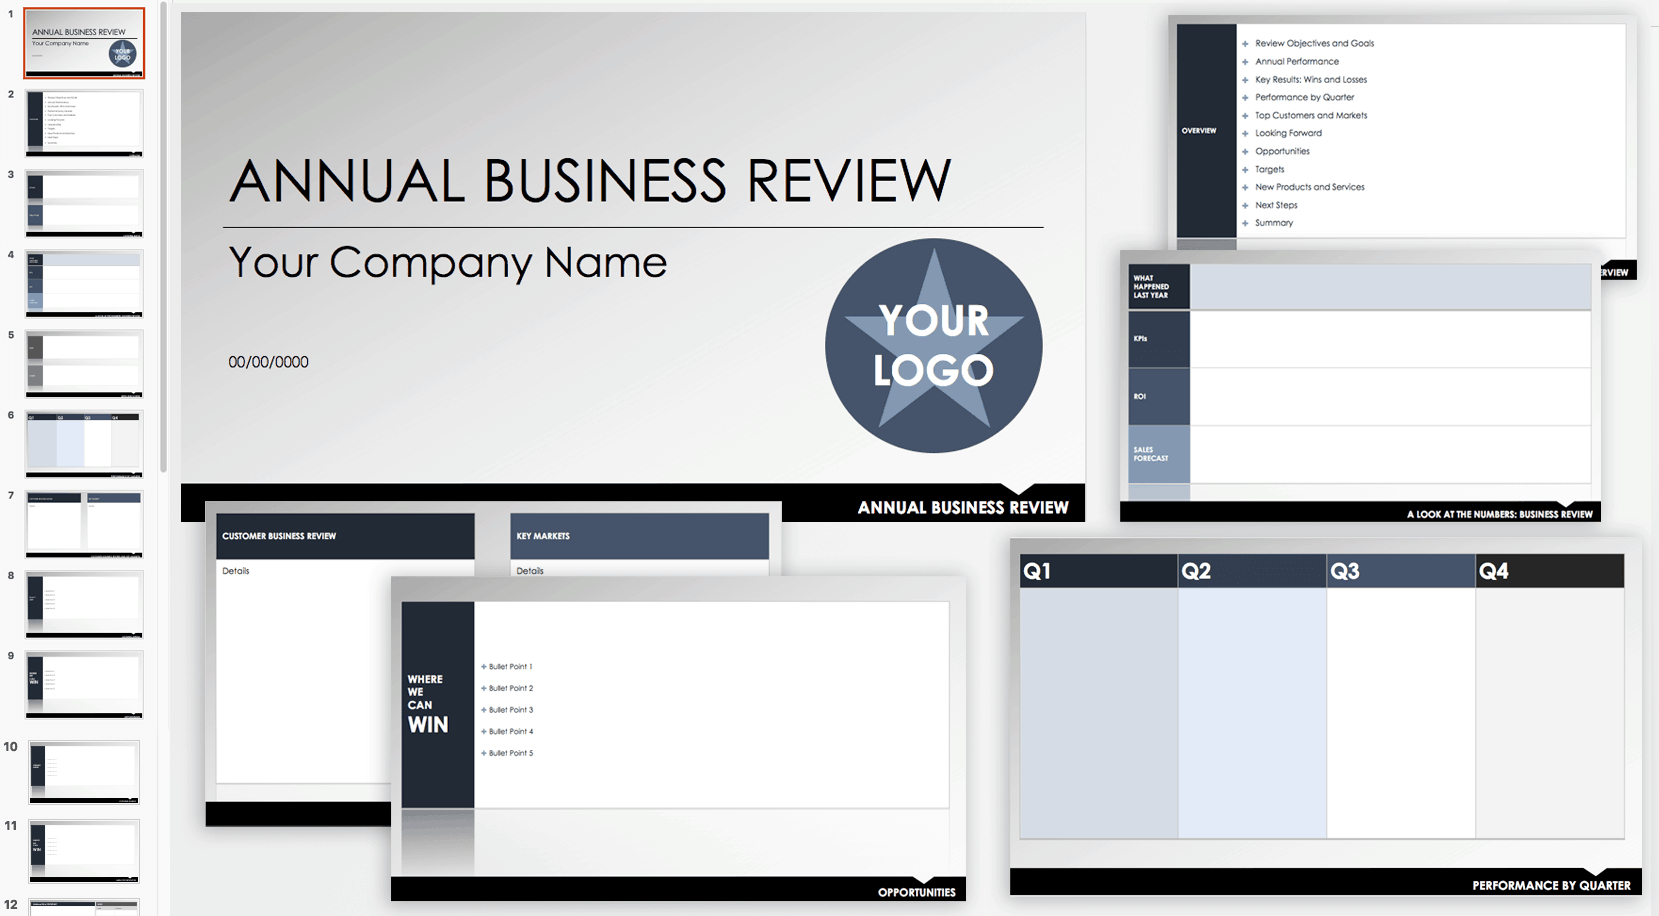 Free Qbr And Business Review Templates | Smartsheet With Business Review Report Template